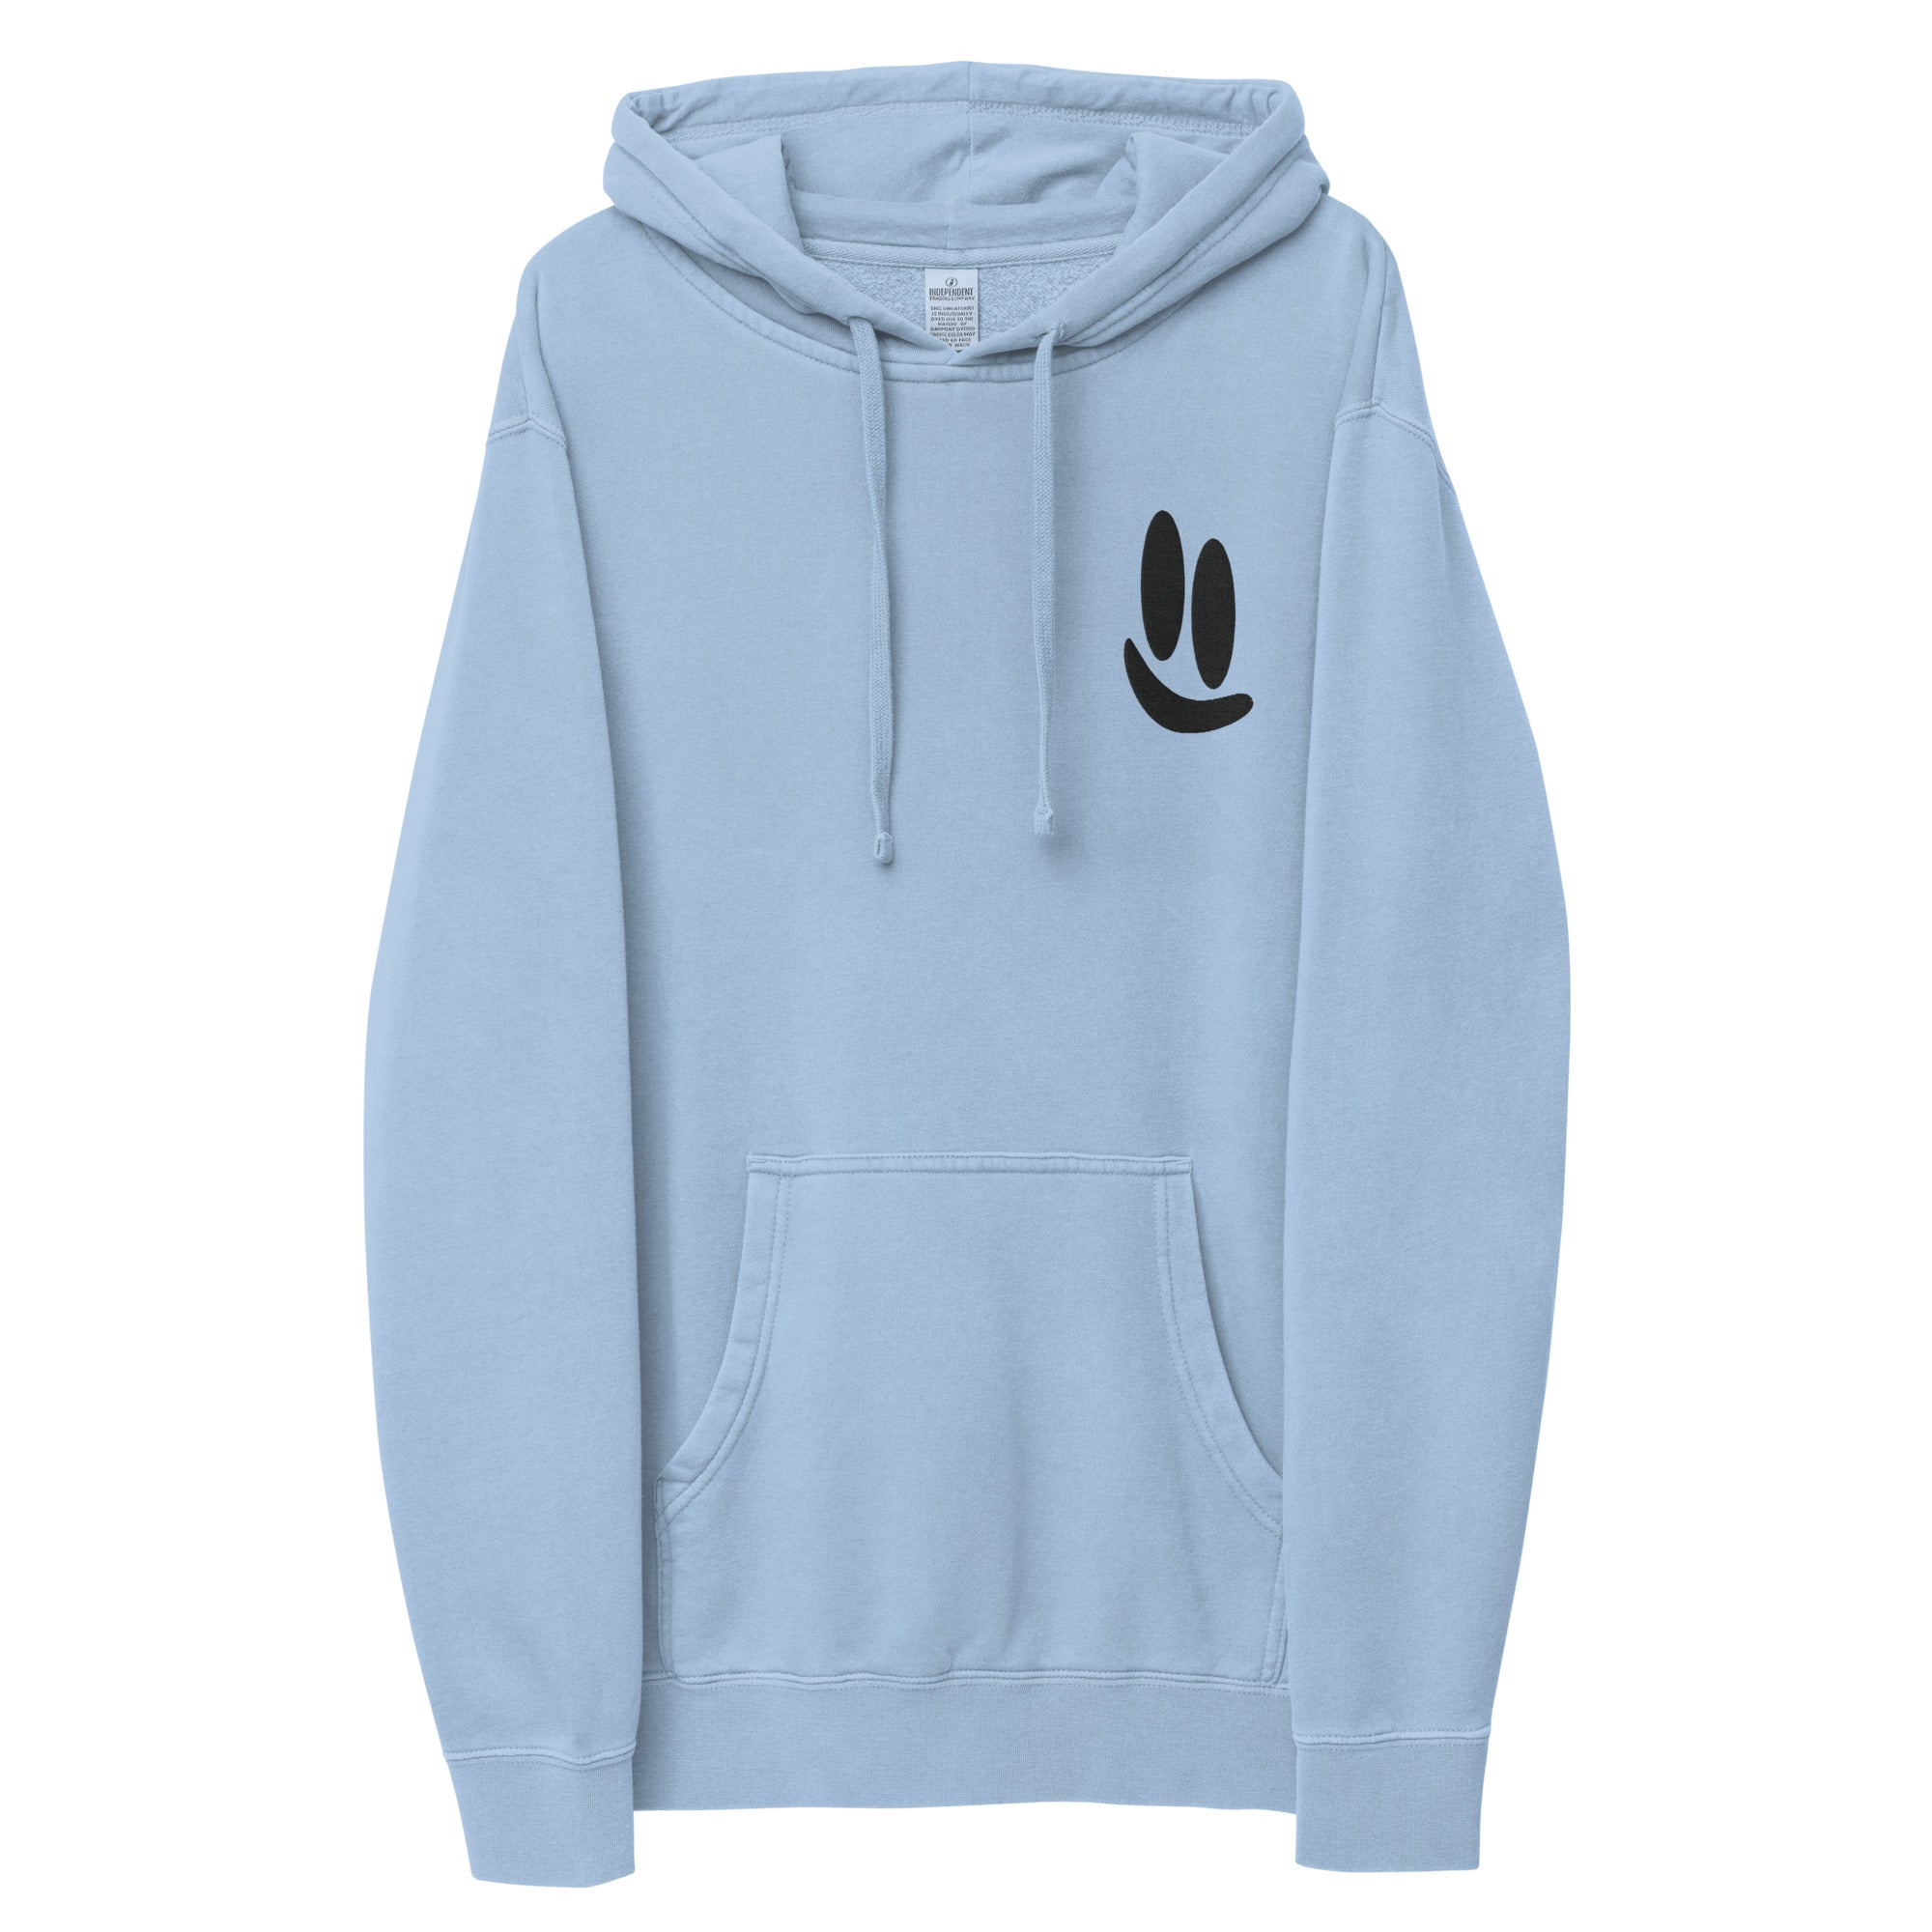 Smile More - Unisex Pigment-Dyed Hoodie